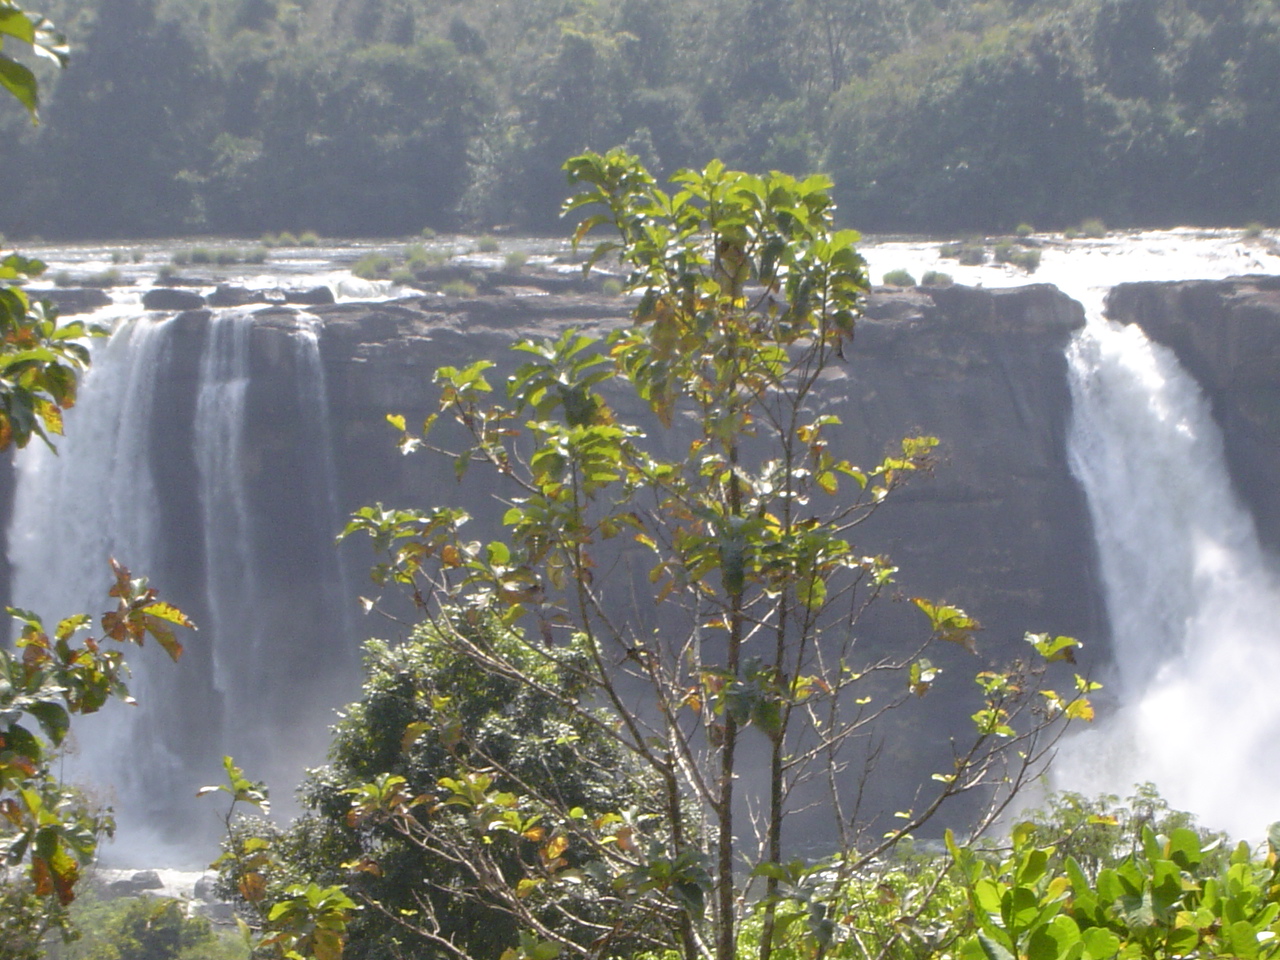 [athirappilly1.JPG]